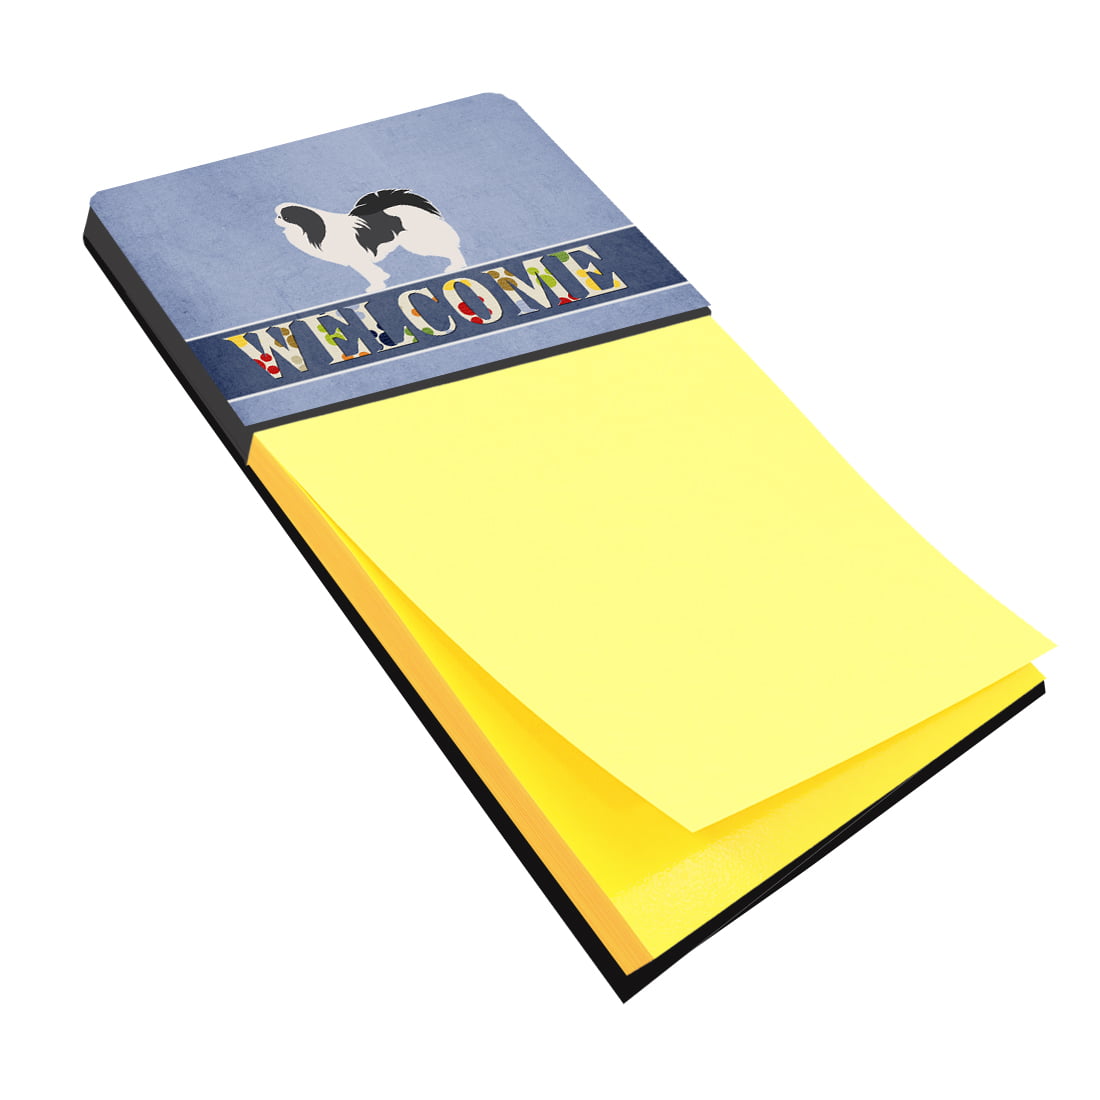 Bb5541sn Japanese Chin Welcome Sticky Note Holder